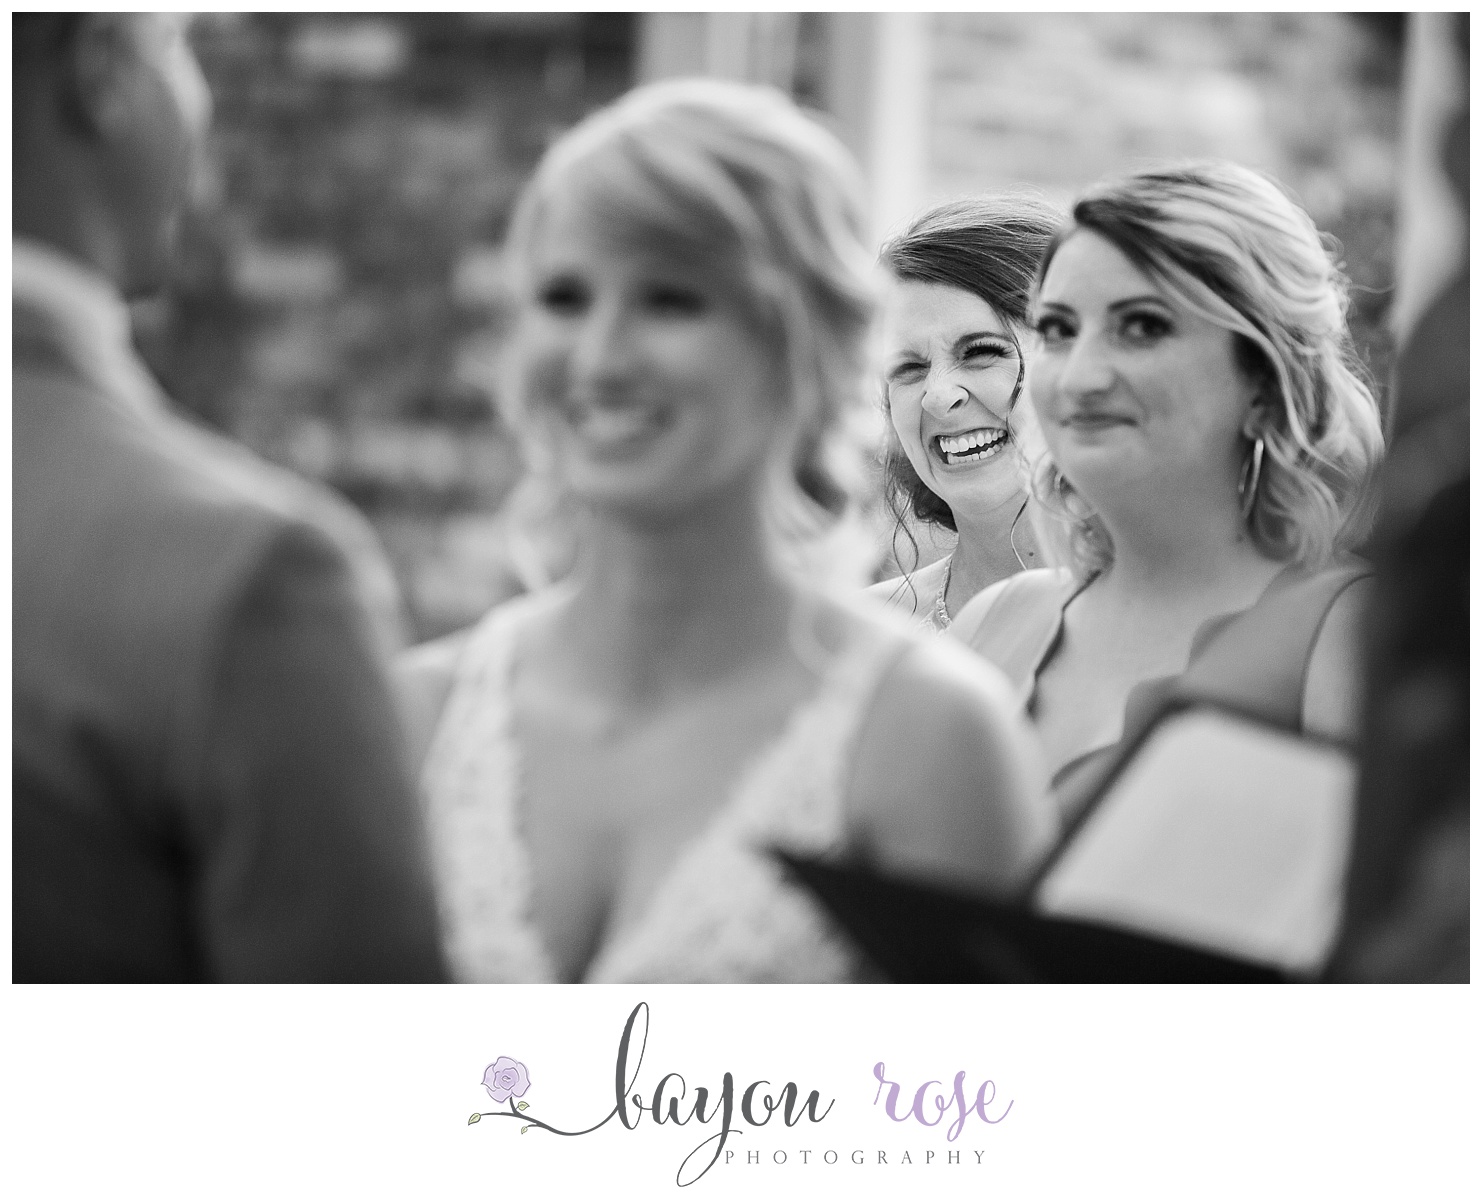 Bridesmaid looks on at bride and groom and cries as she laughs during the vows